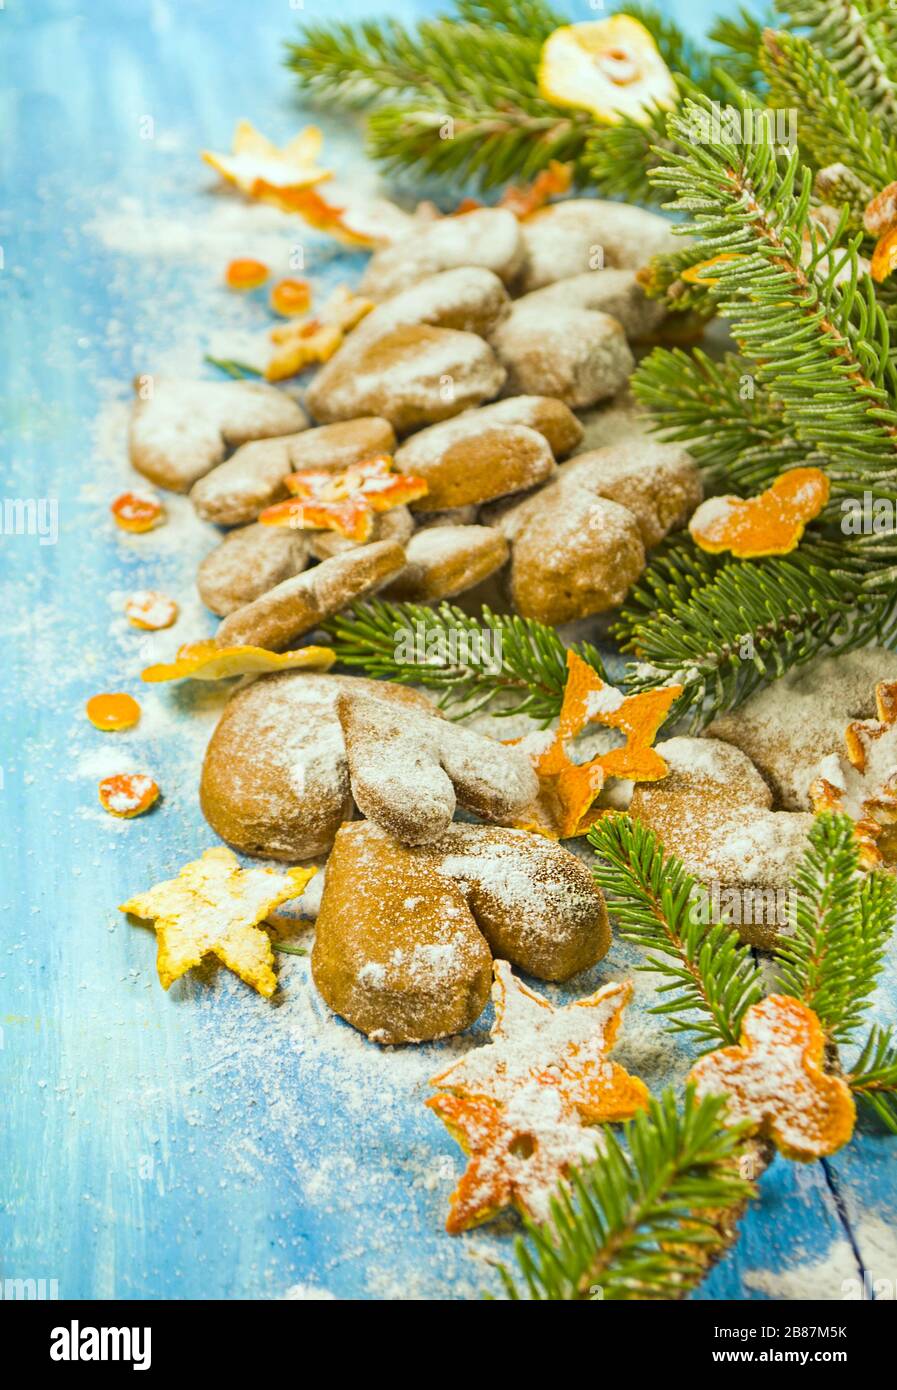 Materials for making a Christmas wreath. Christmas wreath with natural decorations on rustic wooden background with copy space. Stock Photo